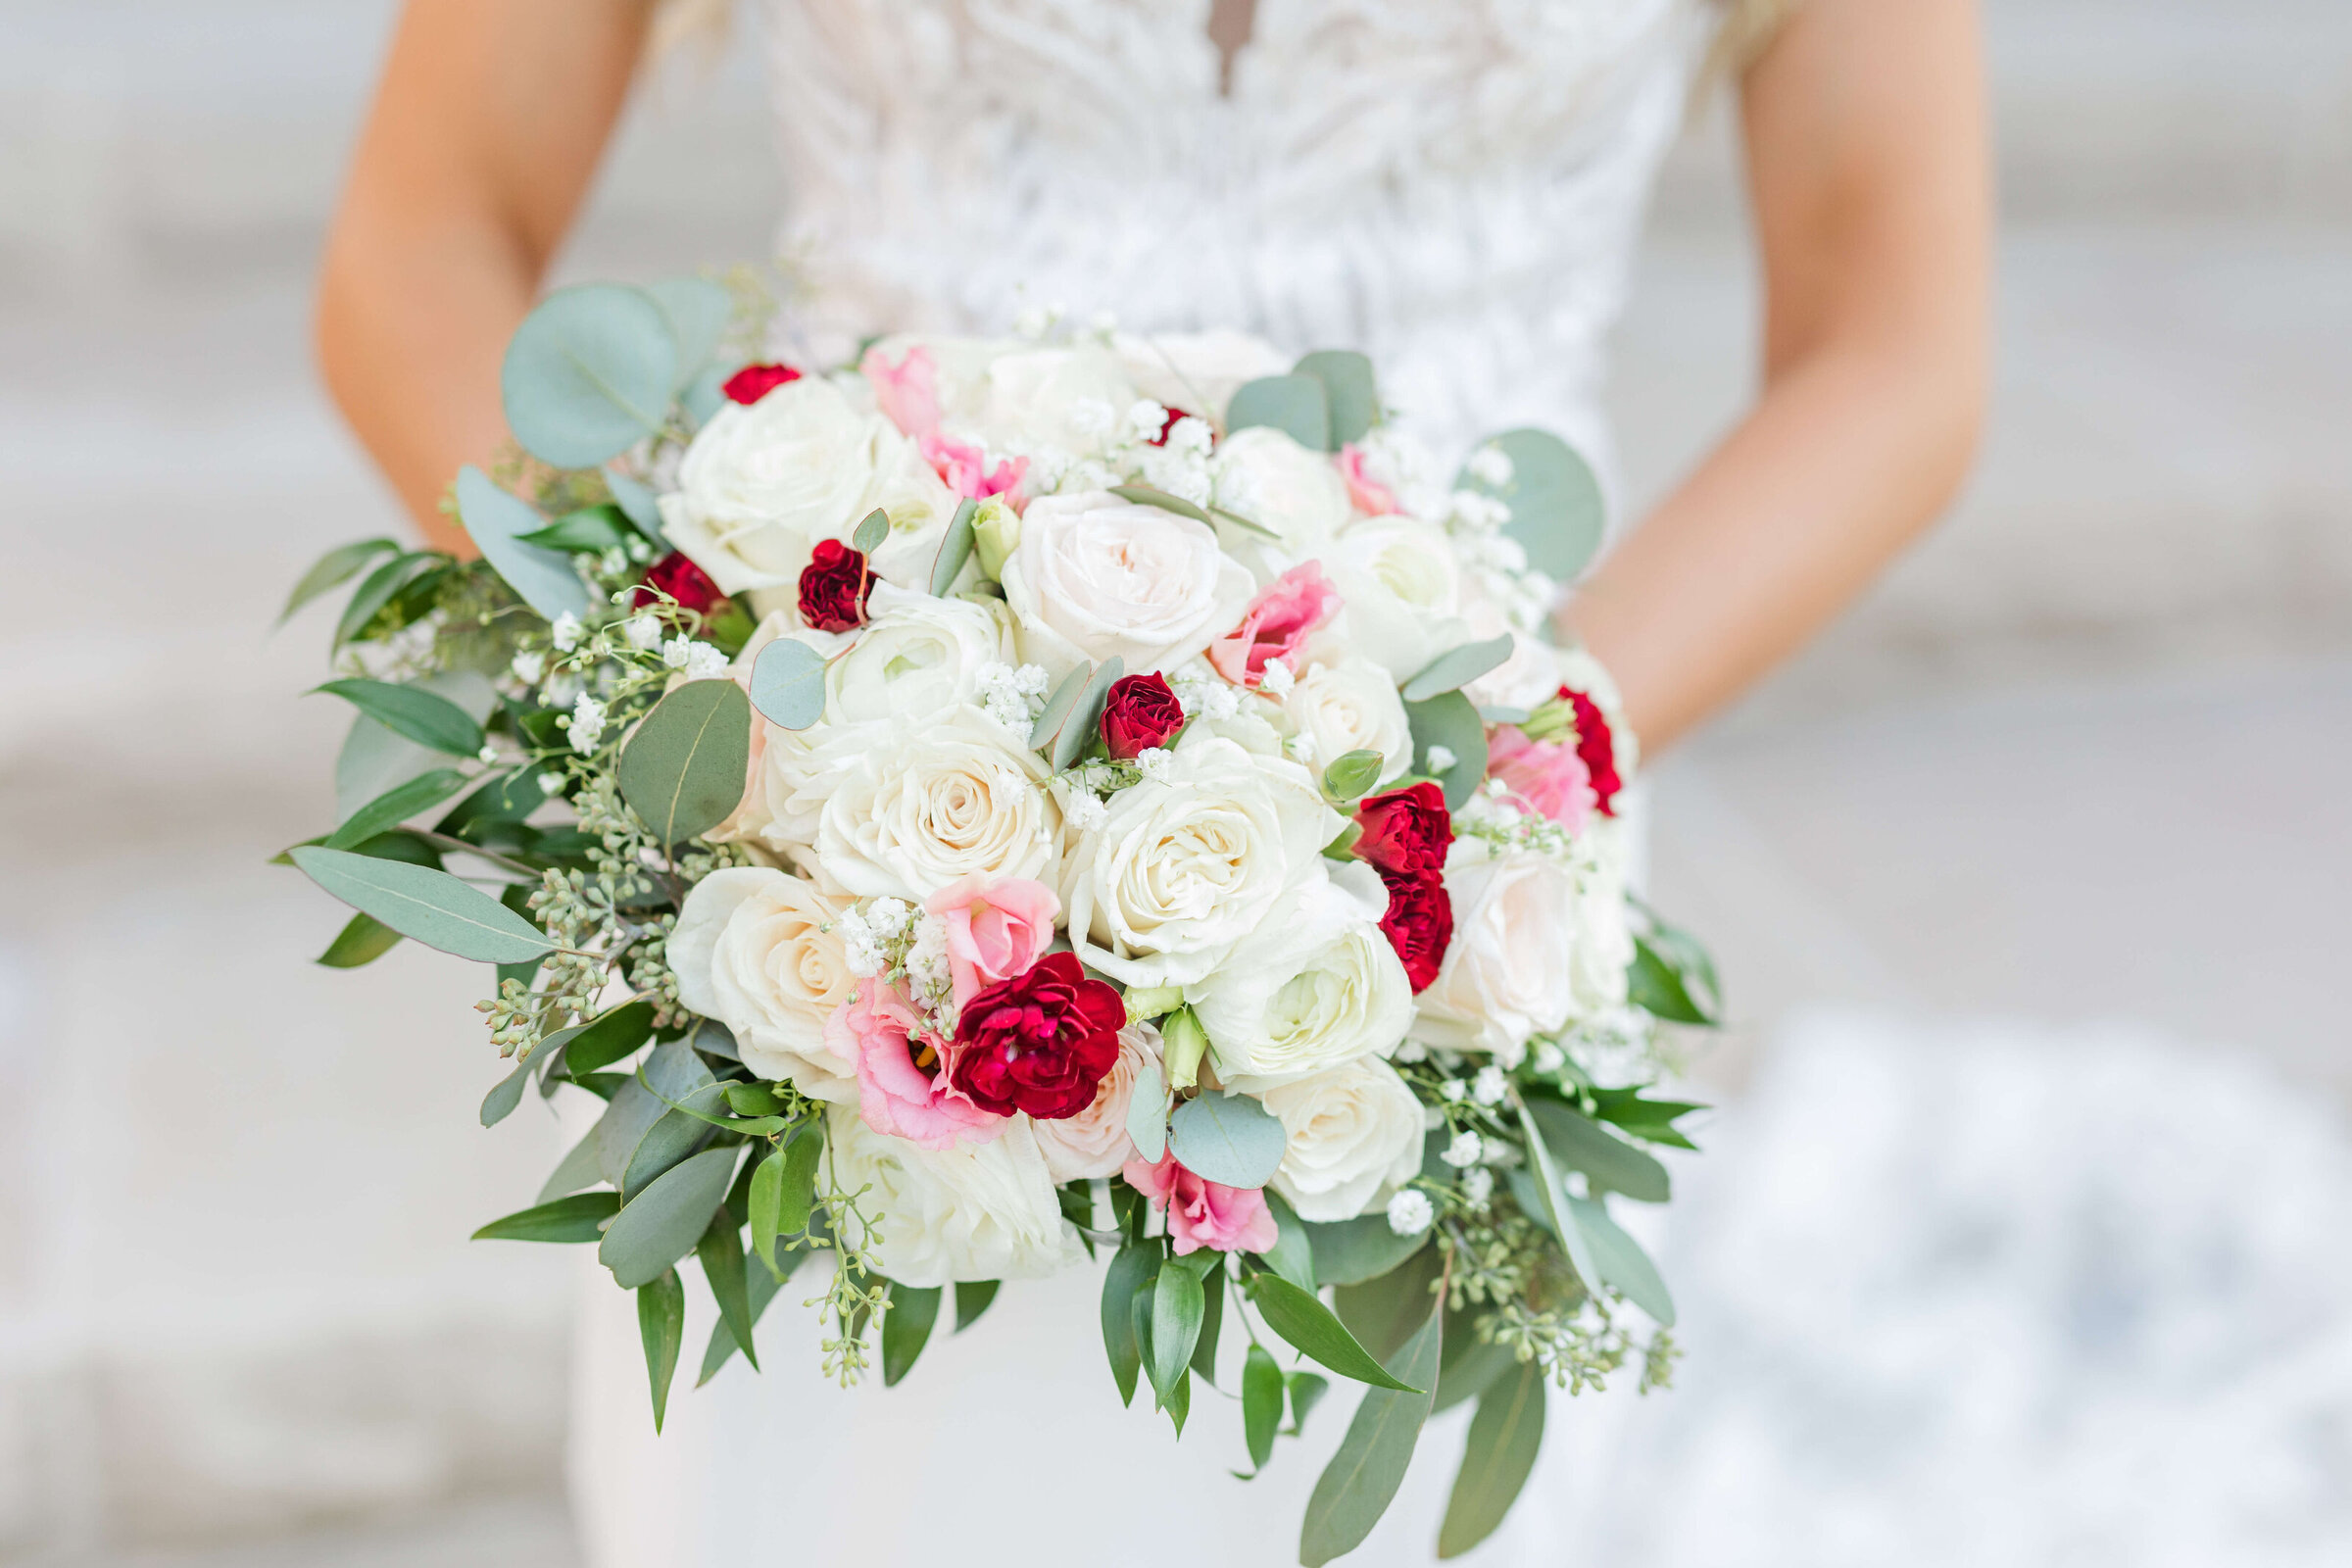 an up close photo of a bride holding a bouquet. The bouquet has red, white, and pink flowers. Taken by a Lexington wedding photographer